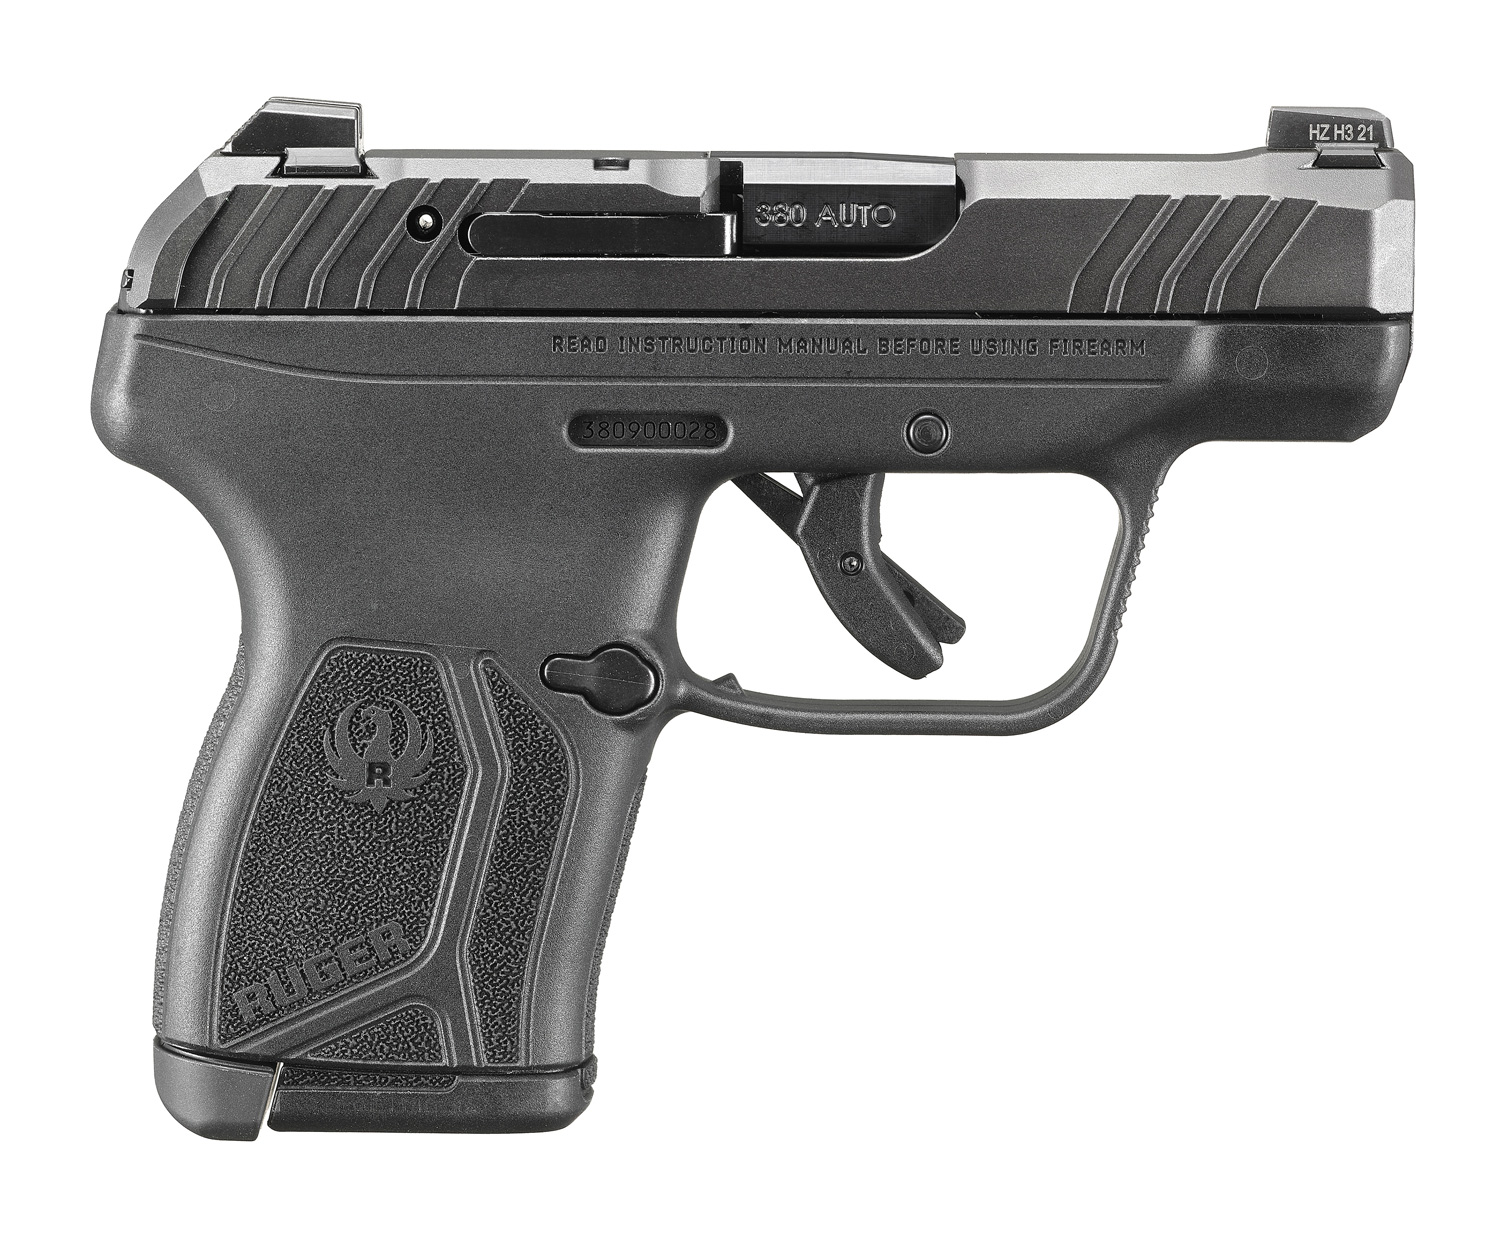 Pistole Ruger LCP MAX